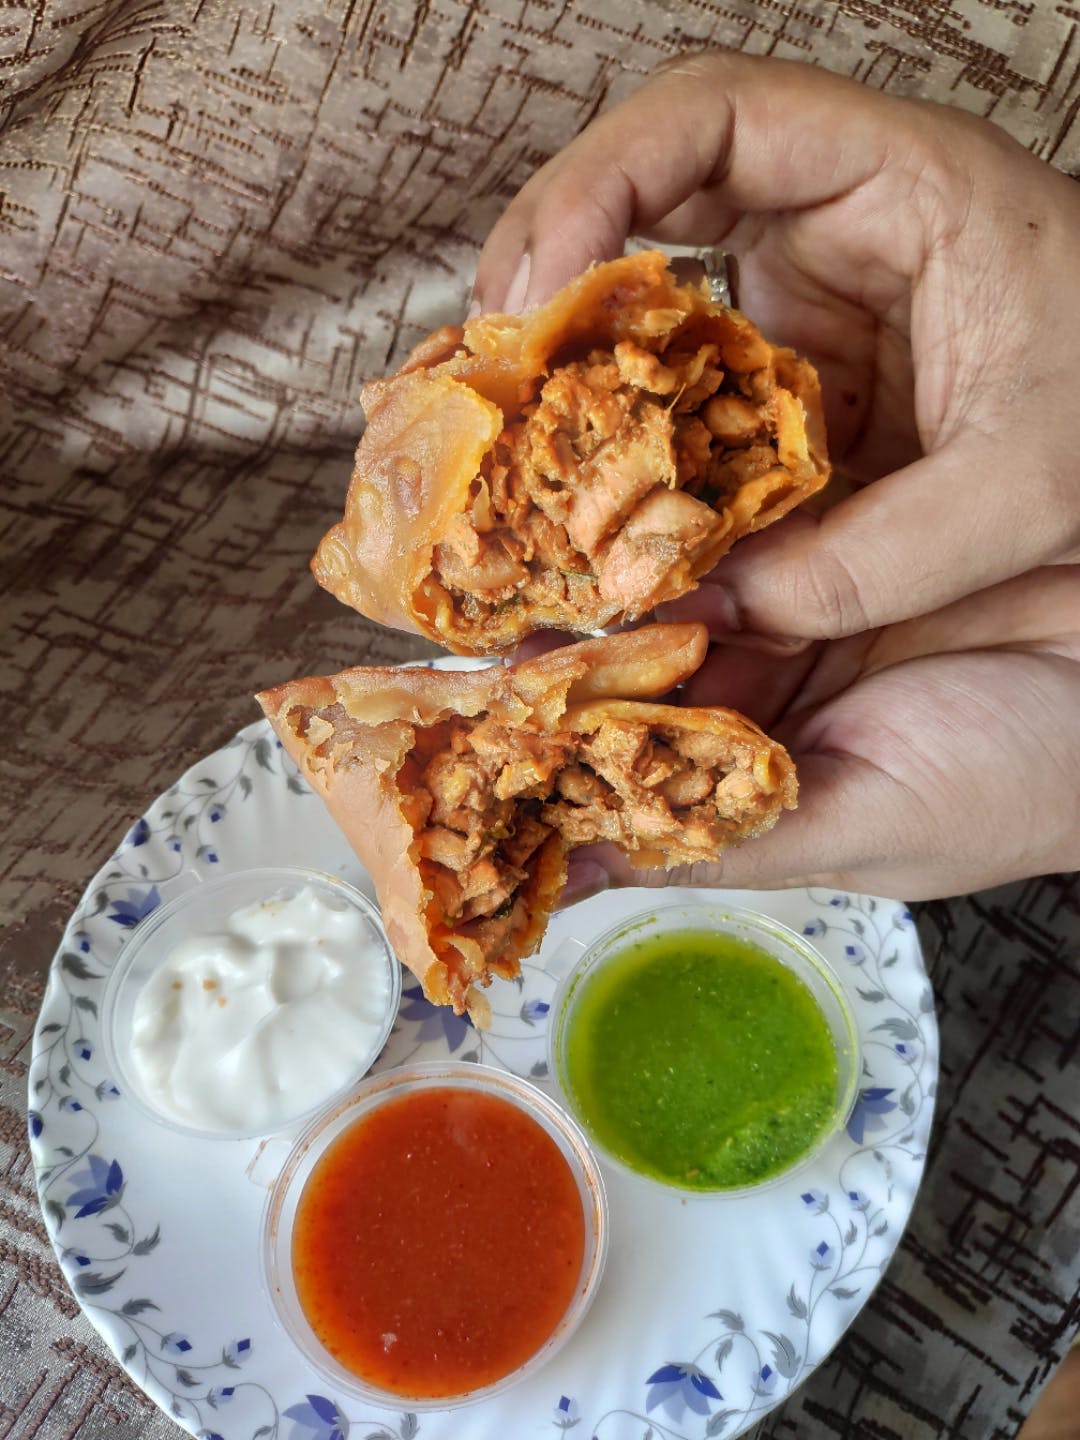 Check Out The Crazily Yummy Fusion Samosa Here!